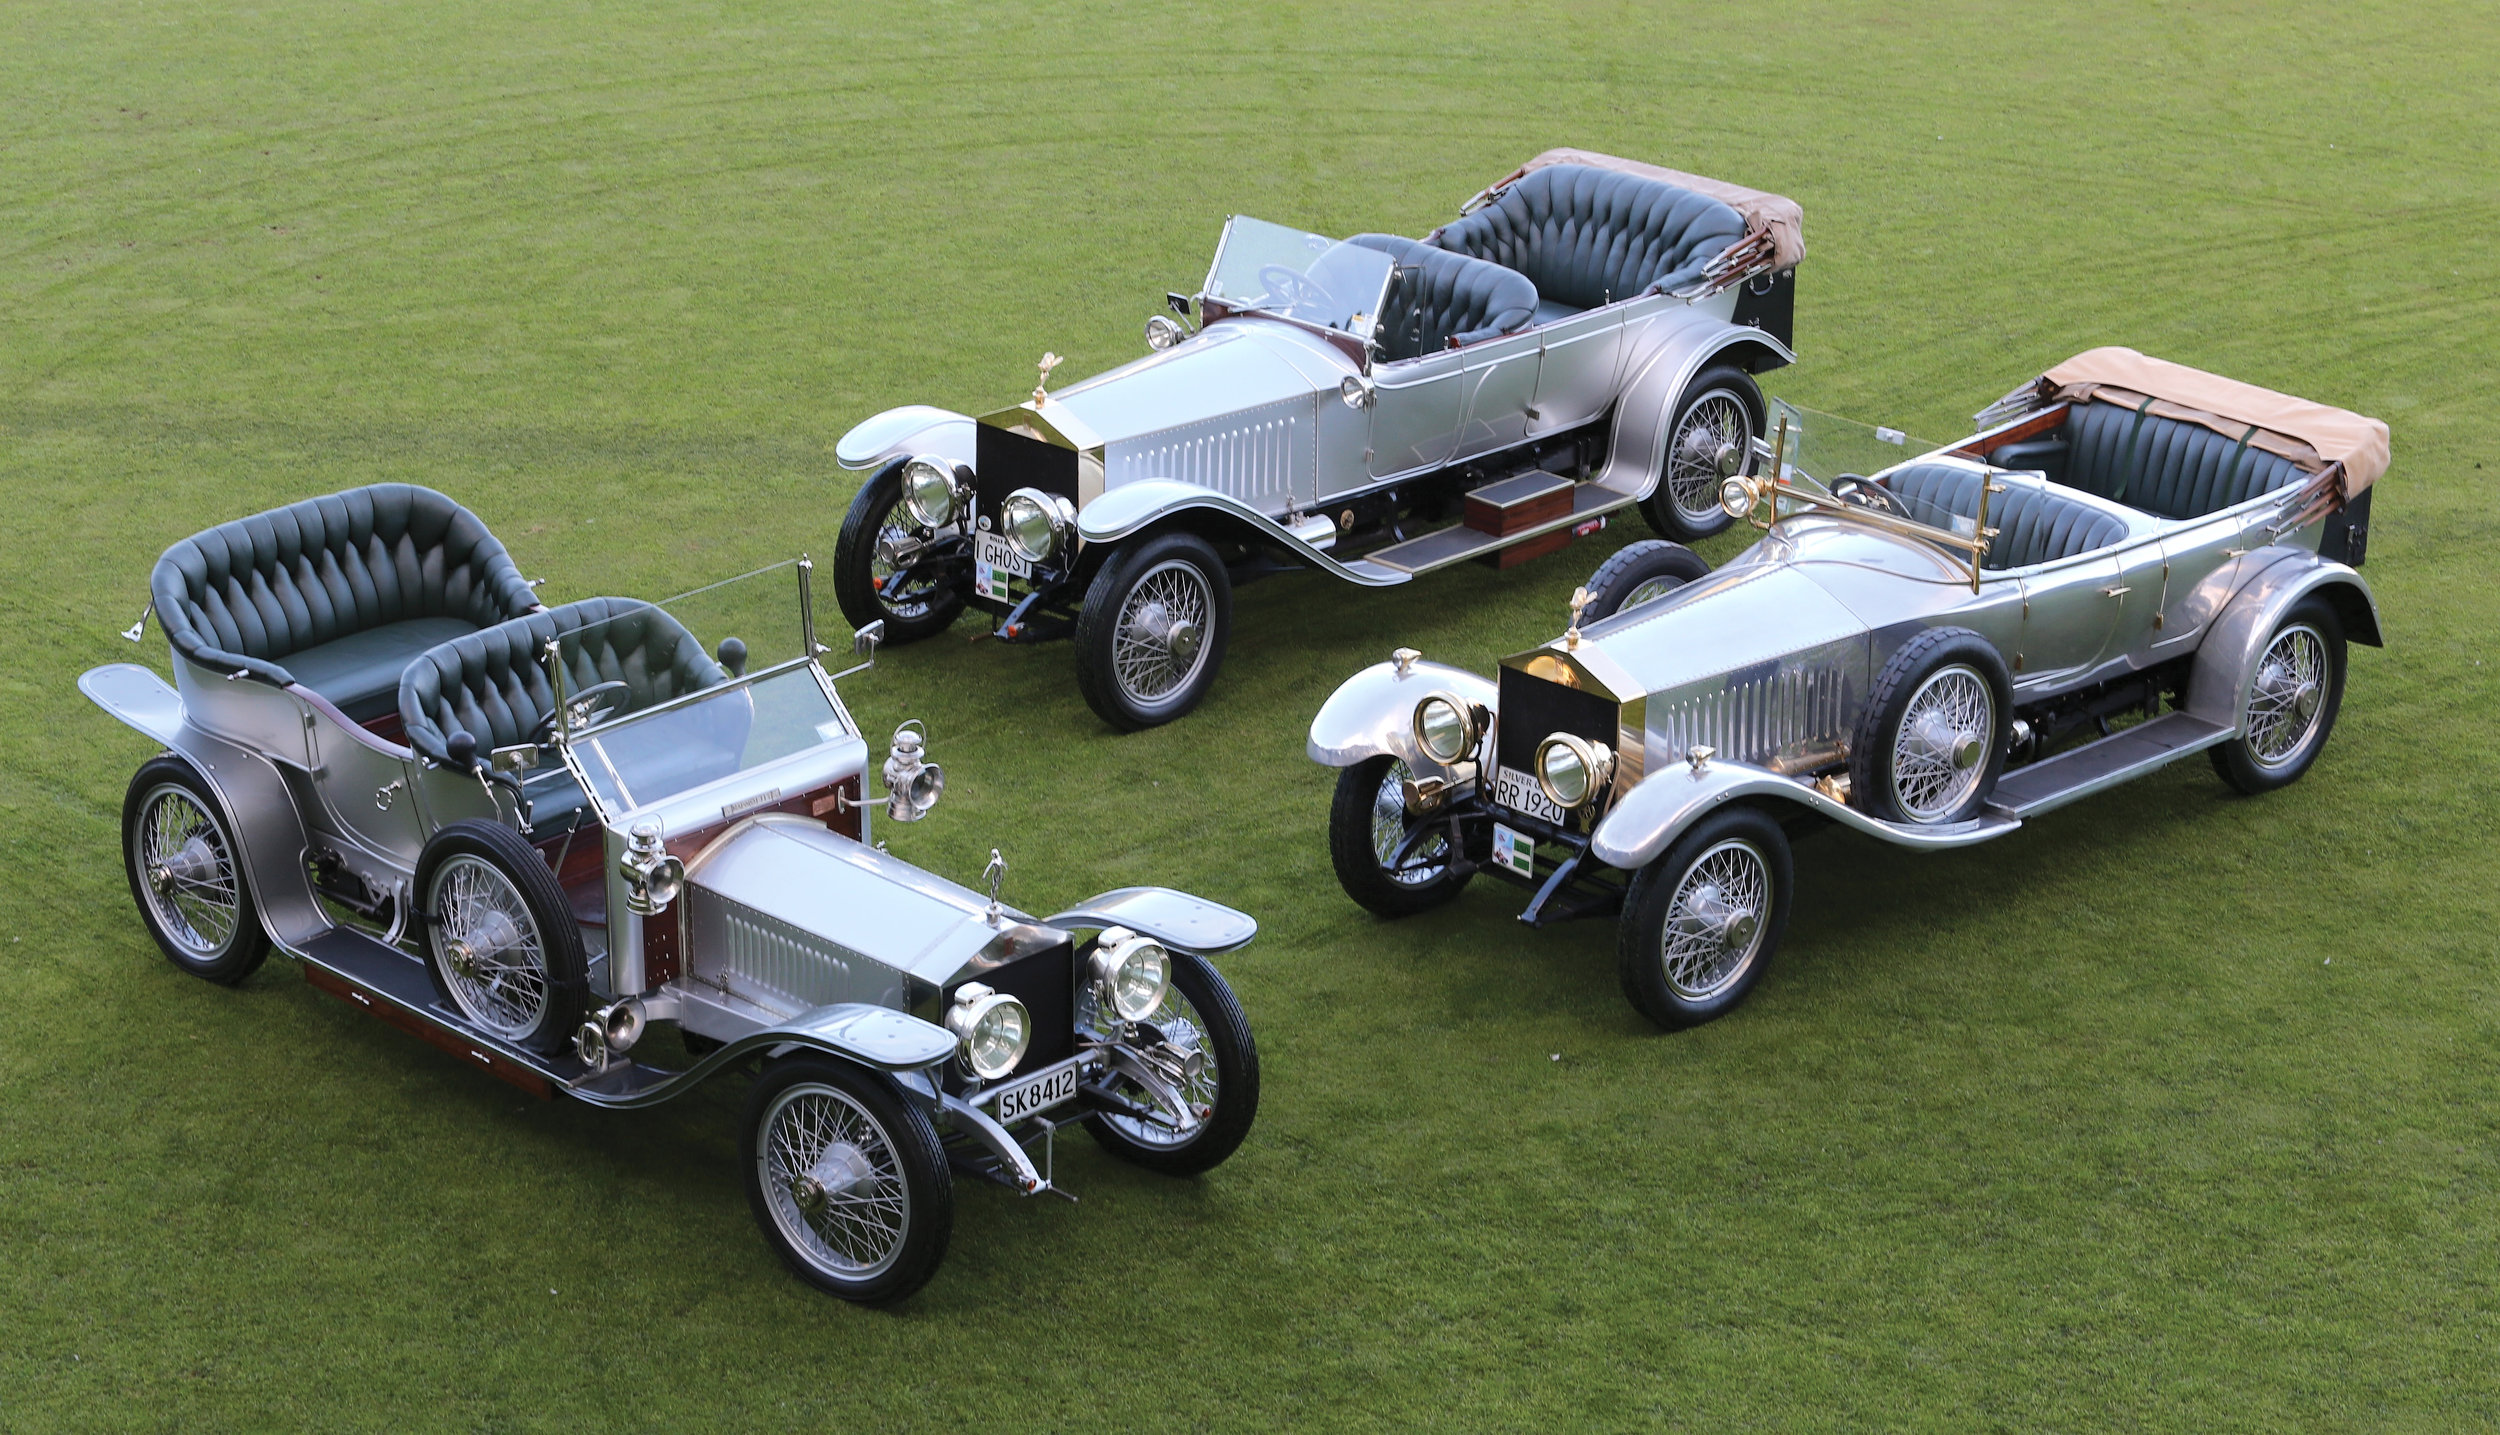 On show in their full glory, the three Silver Ghost Rolls-Royces—on the left is the 1908 model, once a wreck dumped in the Australian outback; at the rear is a 1914 model, built for the family of the Russian Tsar; and at right is a 1920 model, made …